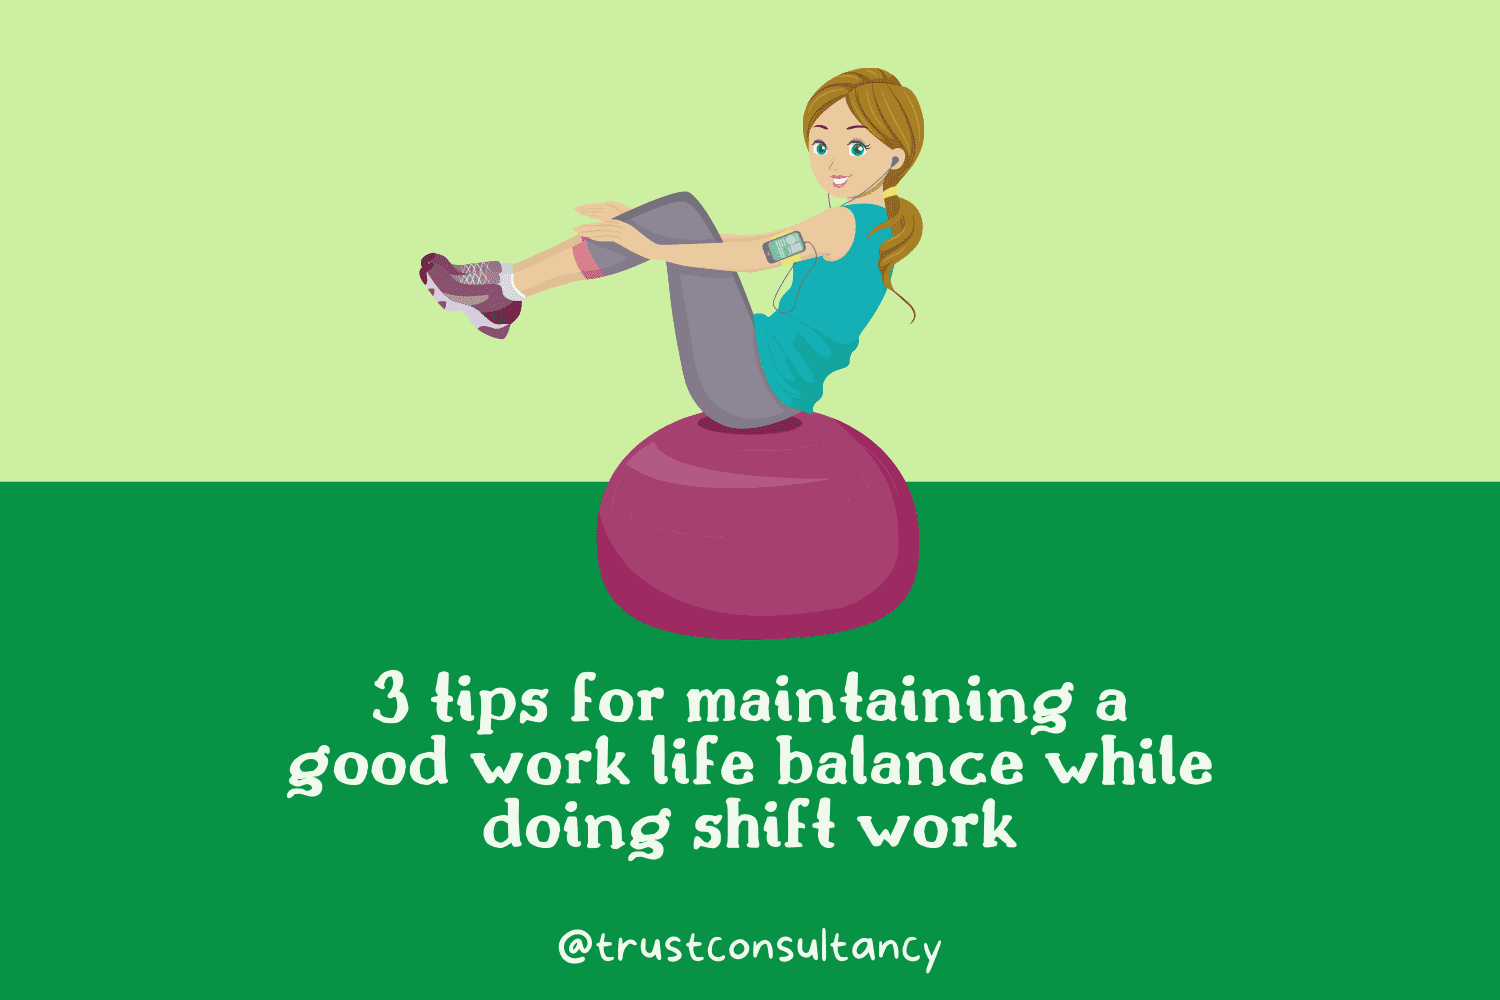 3 tips for maintaining a good work life balance while doing shift work